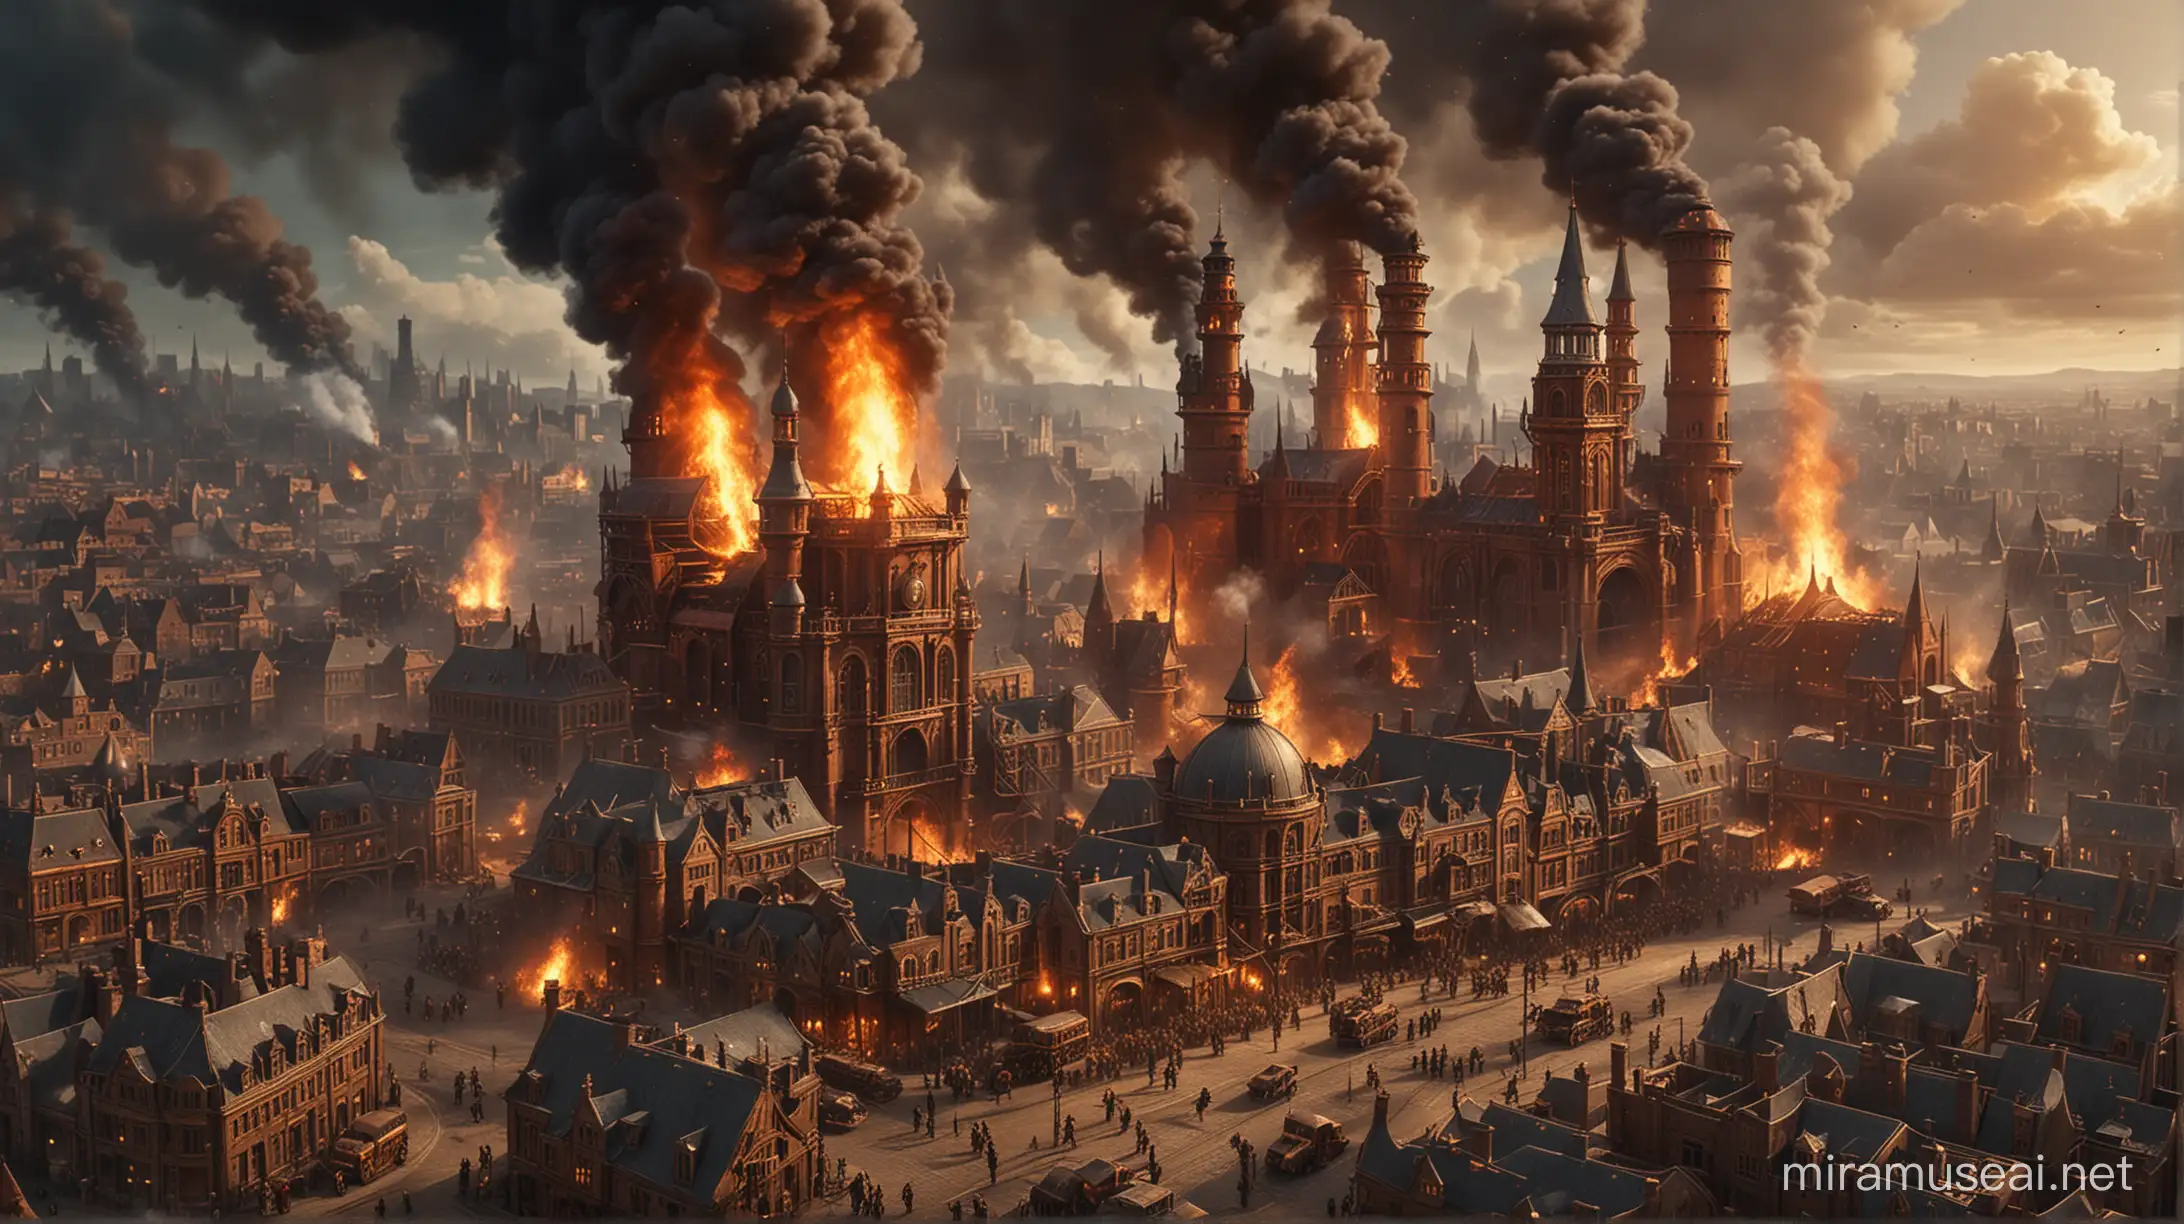 Steampunk City Engulfed in Great Fire with Multiple Fire Brigades